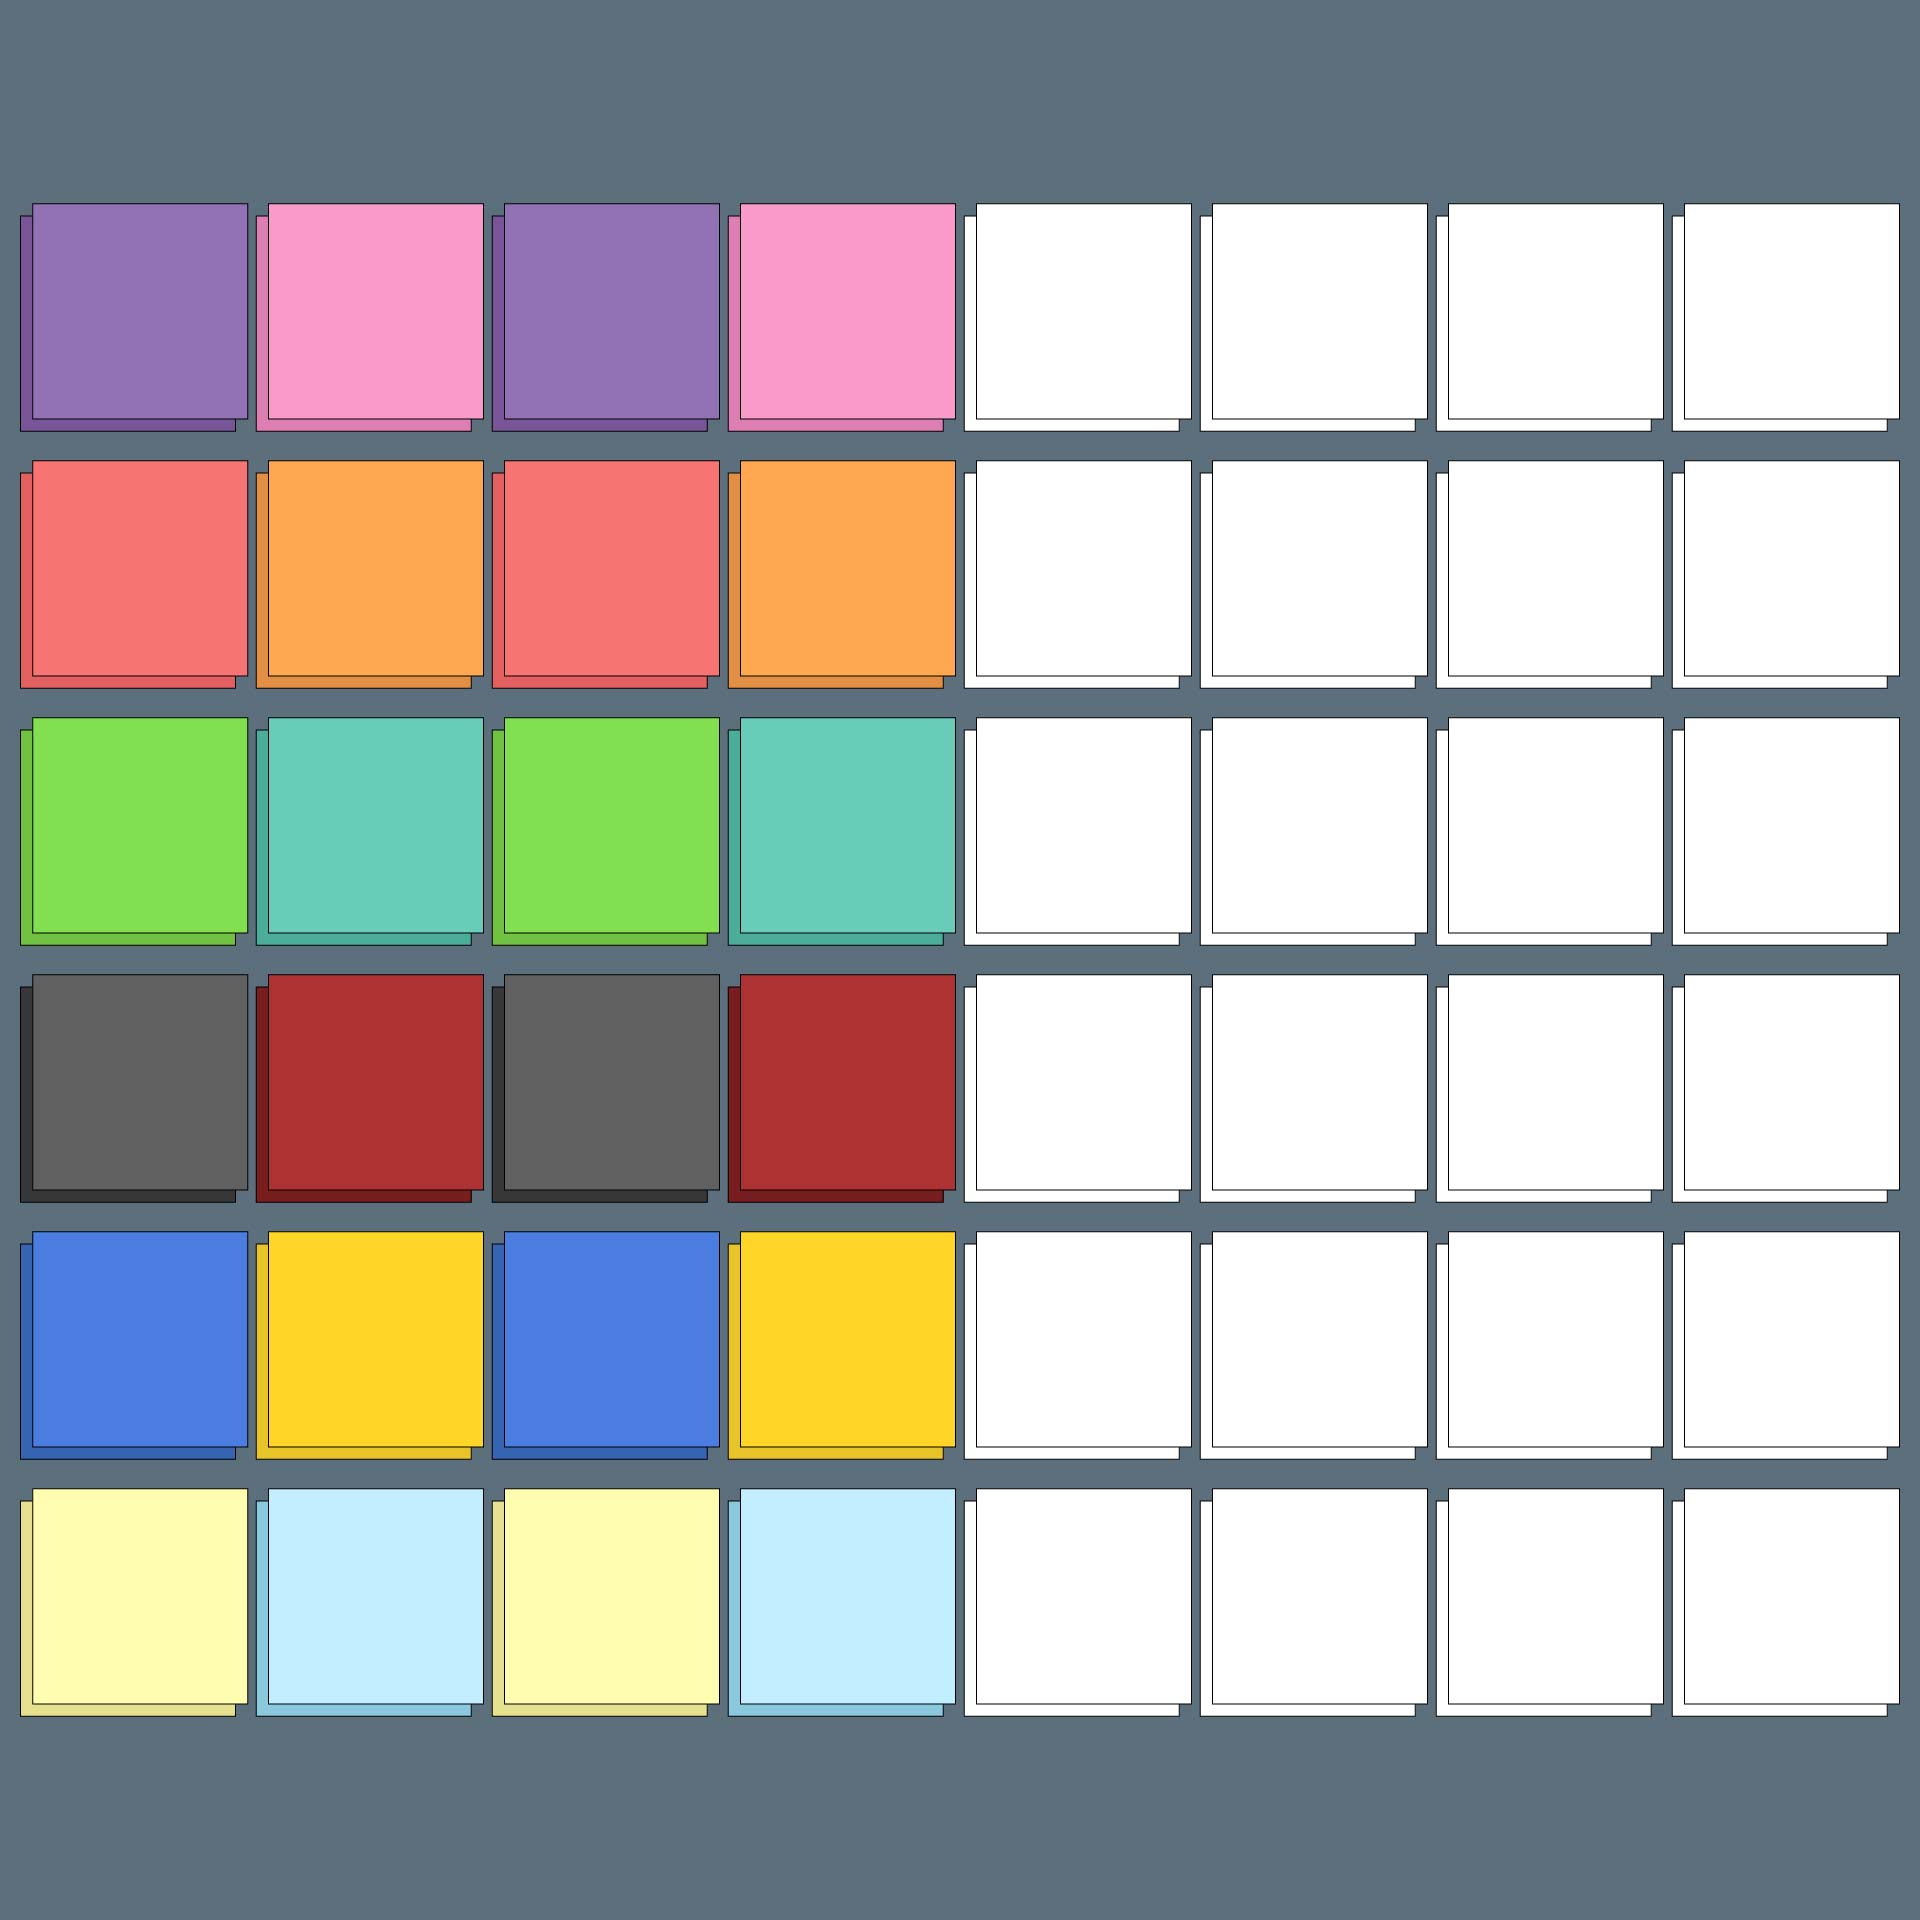 Unifix Cubes Template For Patterning